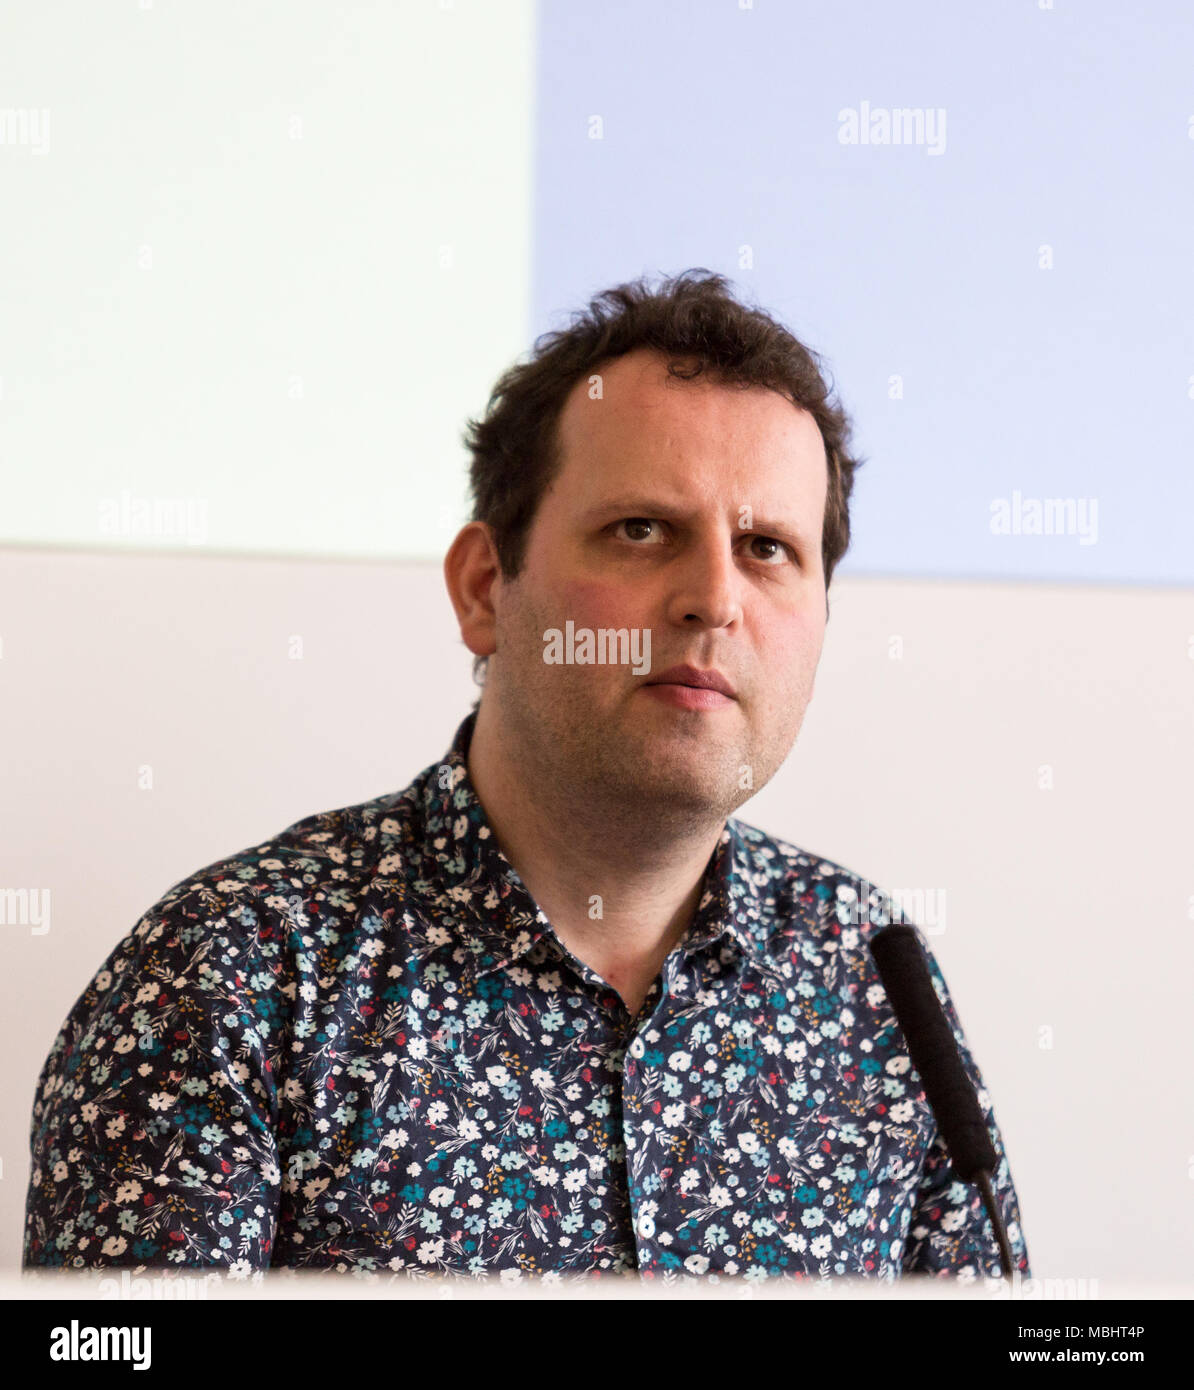 London, UK, April 11, 2018: Author Adam Kay on a meeting at the 2018 London Book Fair in Olympia Exhibition Centre in London. Credit: Michal Busko/Alamy Live News Stock Photo